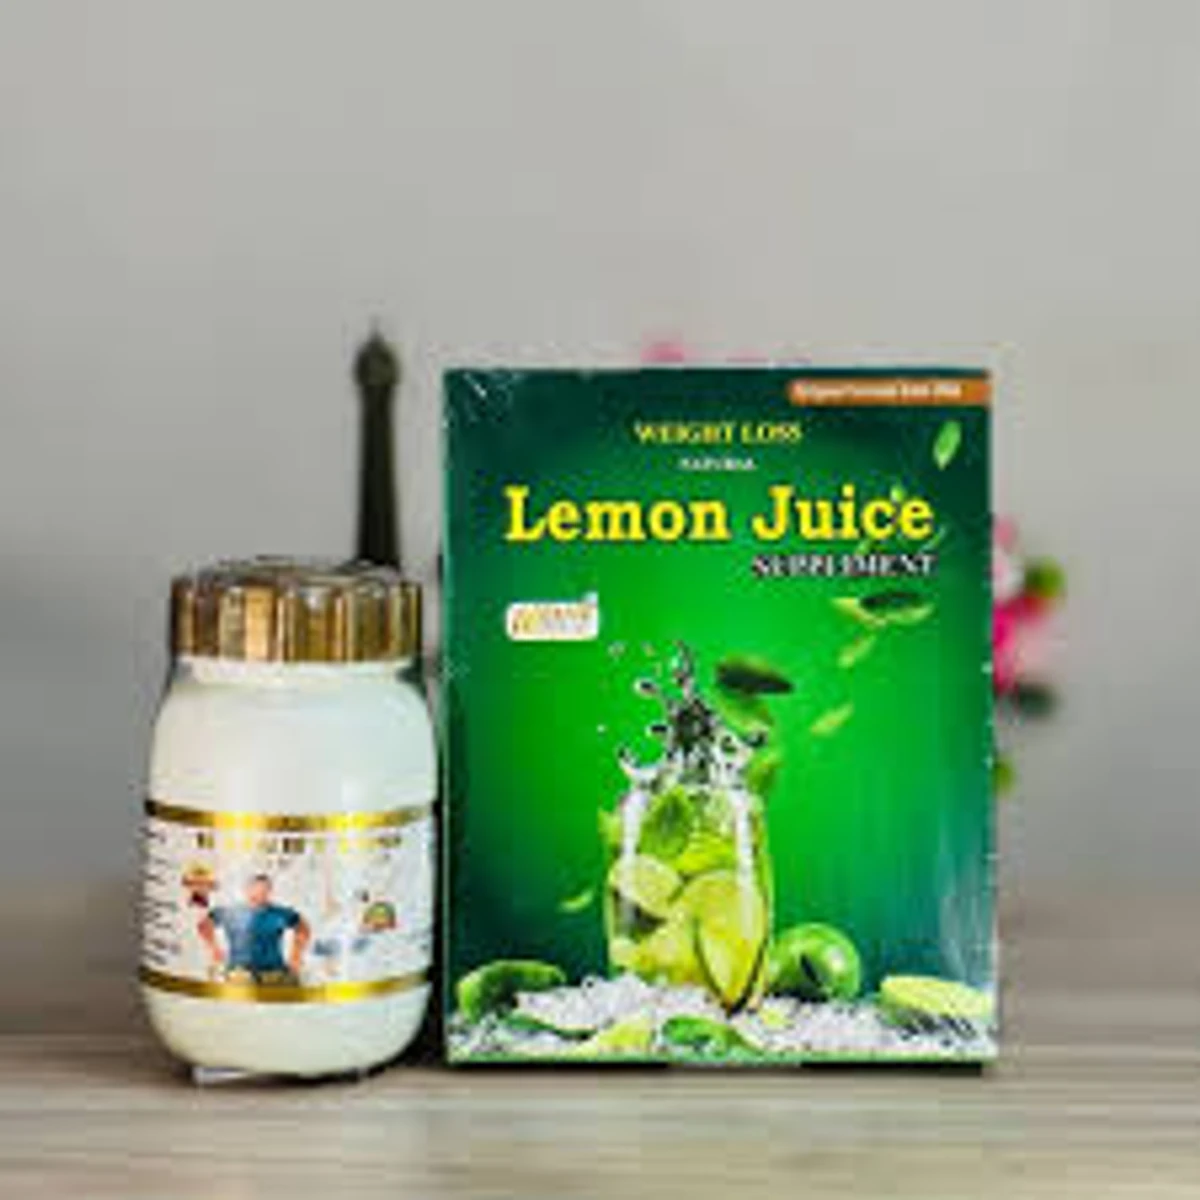 Natural Weight Loss Lemon Juice Suppliment For Slim Body - 120gm